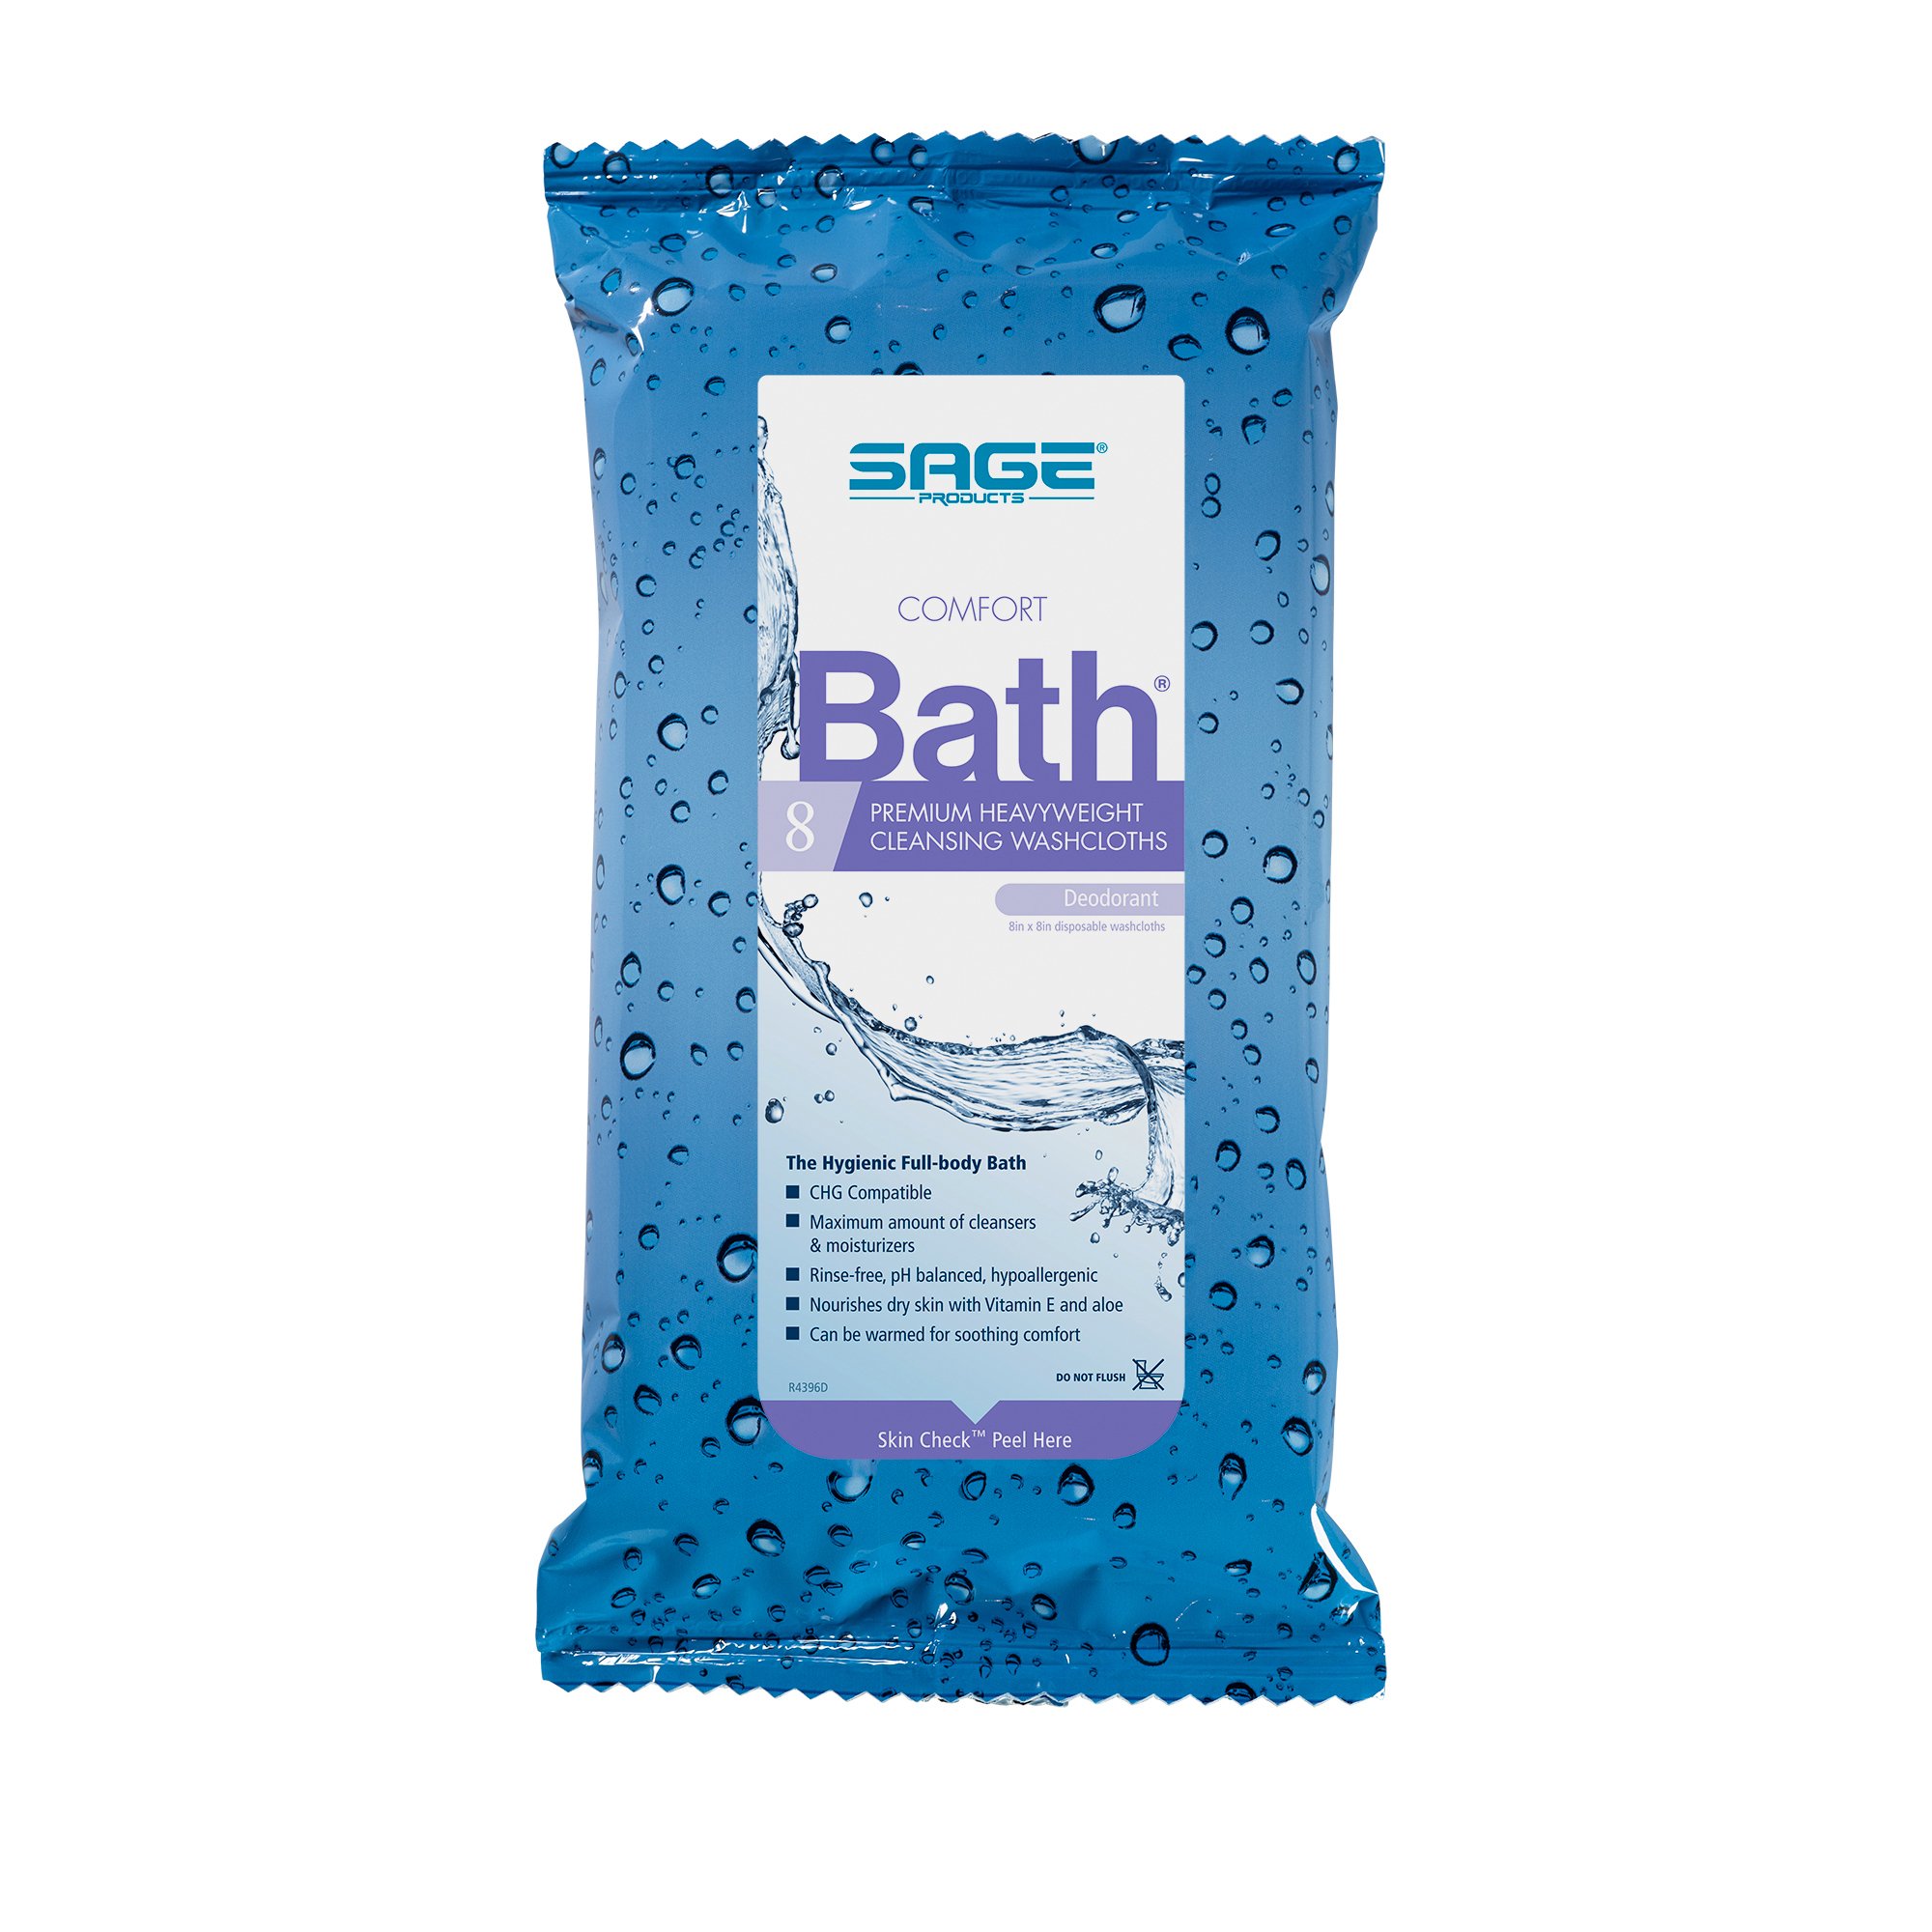 Comfort Bath Bath Wipe 8 X 8 Inch Soft Pack Aloe Scented Pack of 8 - image 2 of 4